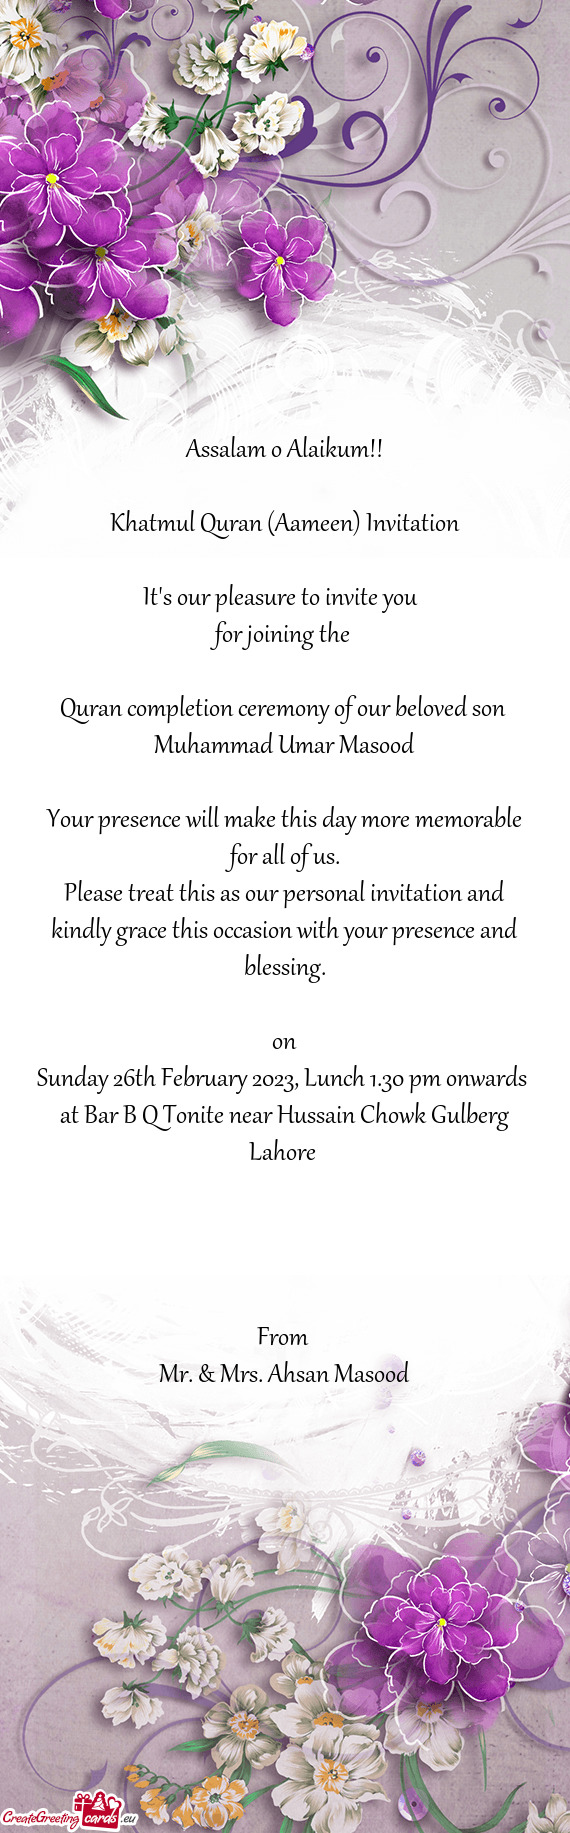 Sunday 26th February 2023, Lunch 1.30 pm onwards